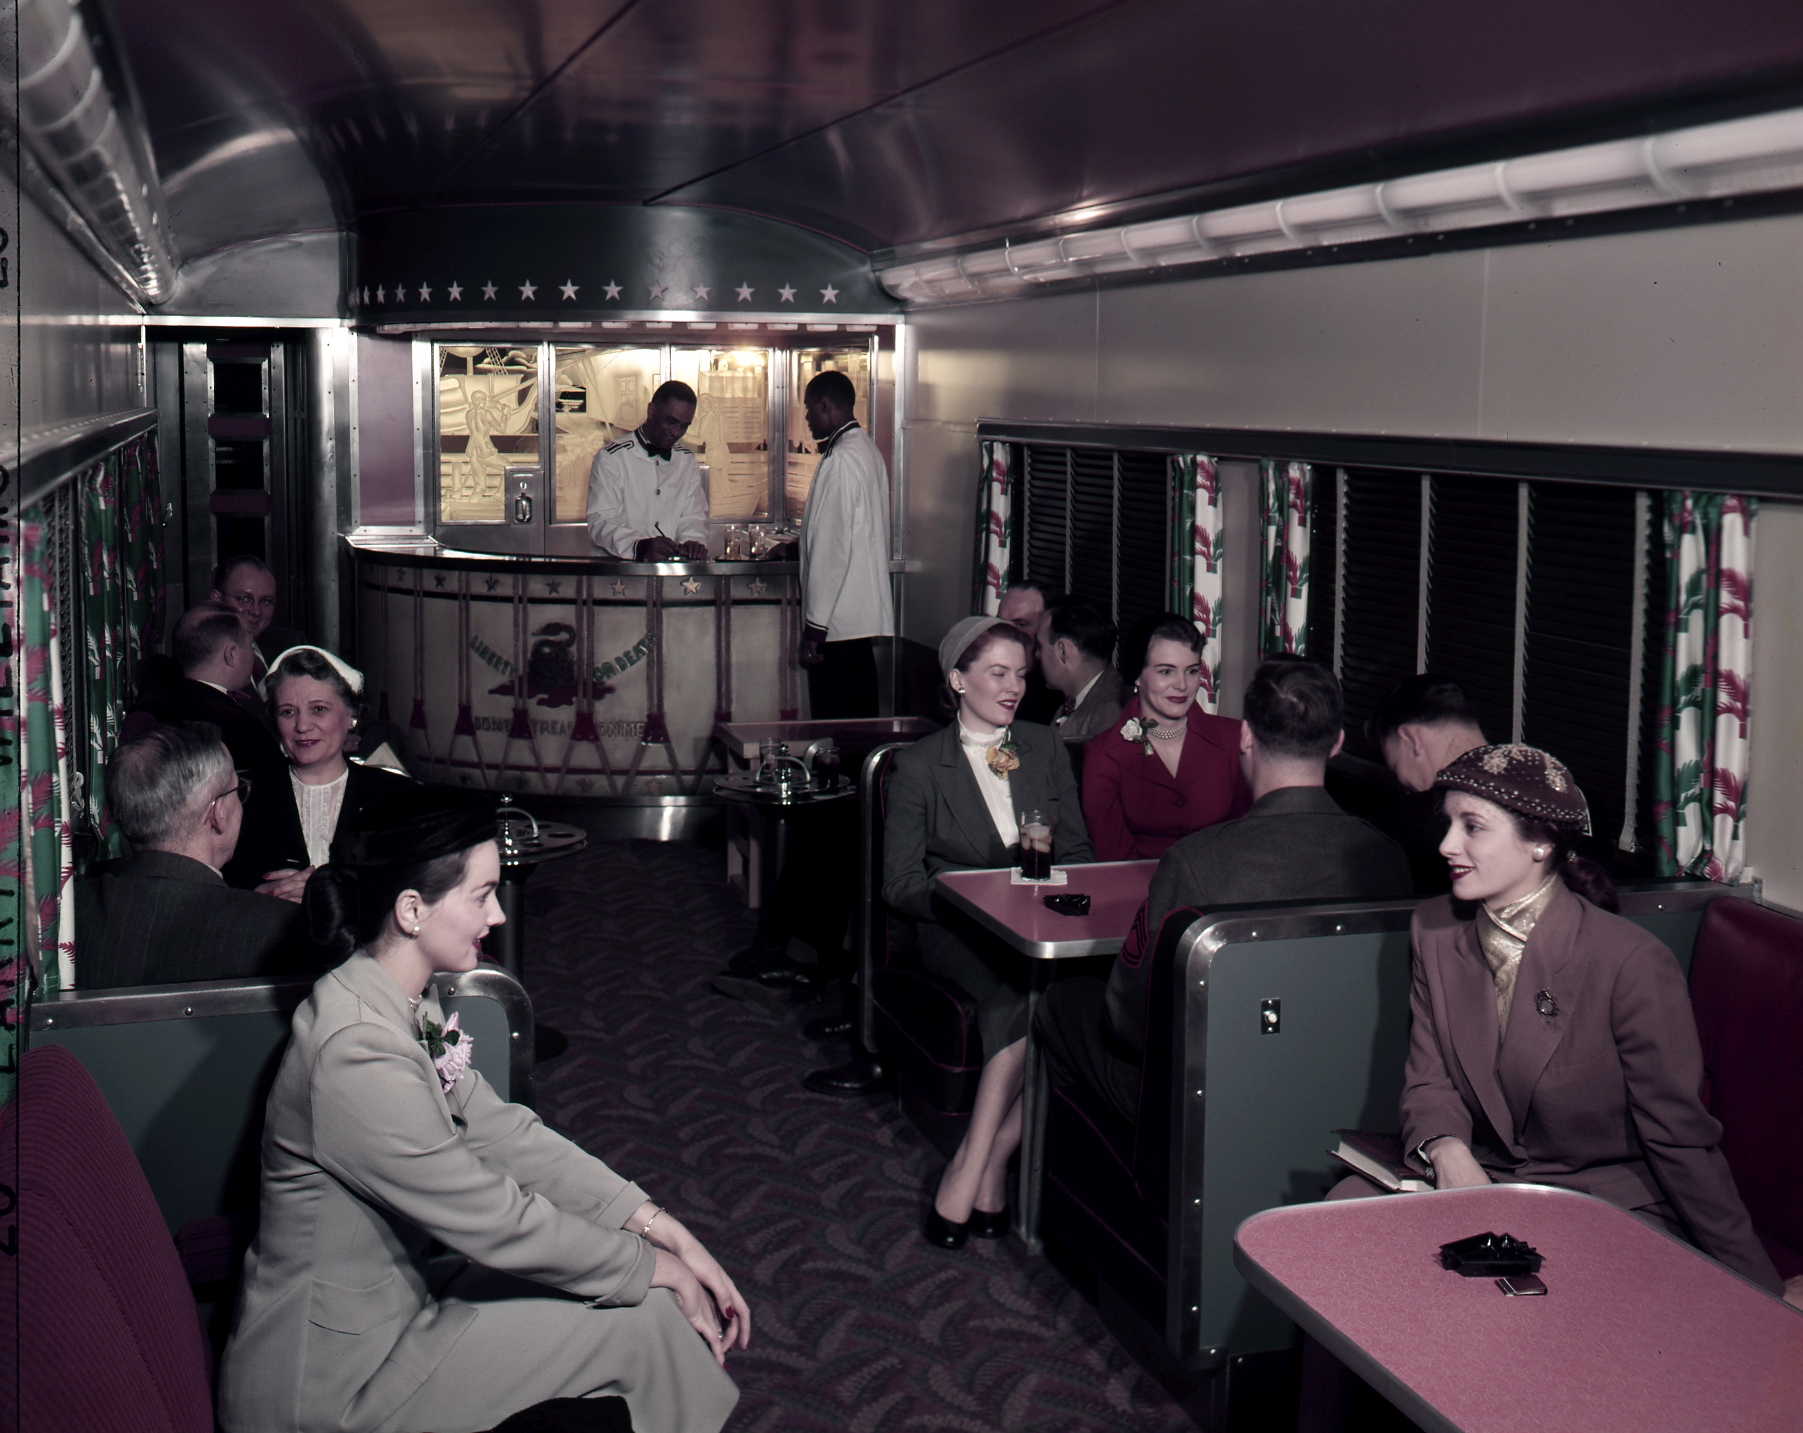 Color image of the interior of a dining car of a train, with passengers and staff.